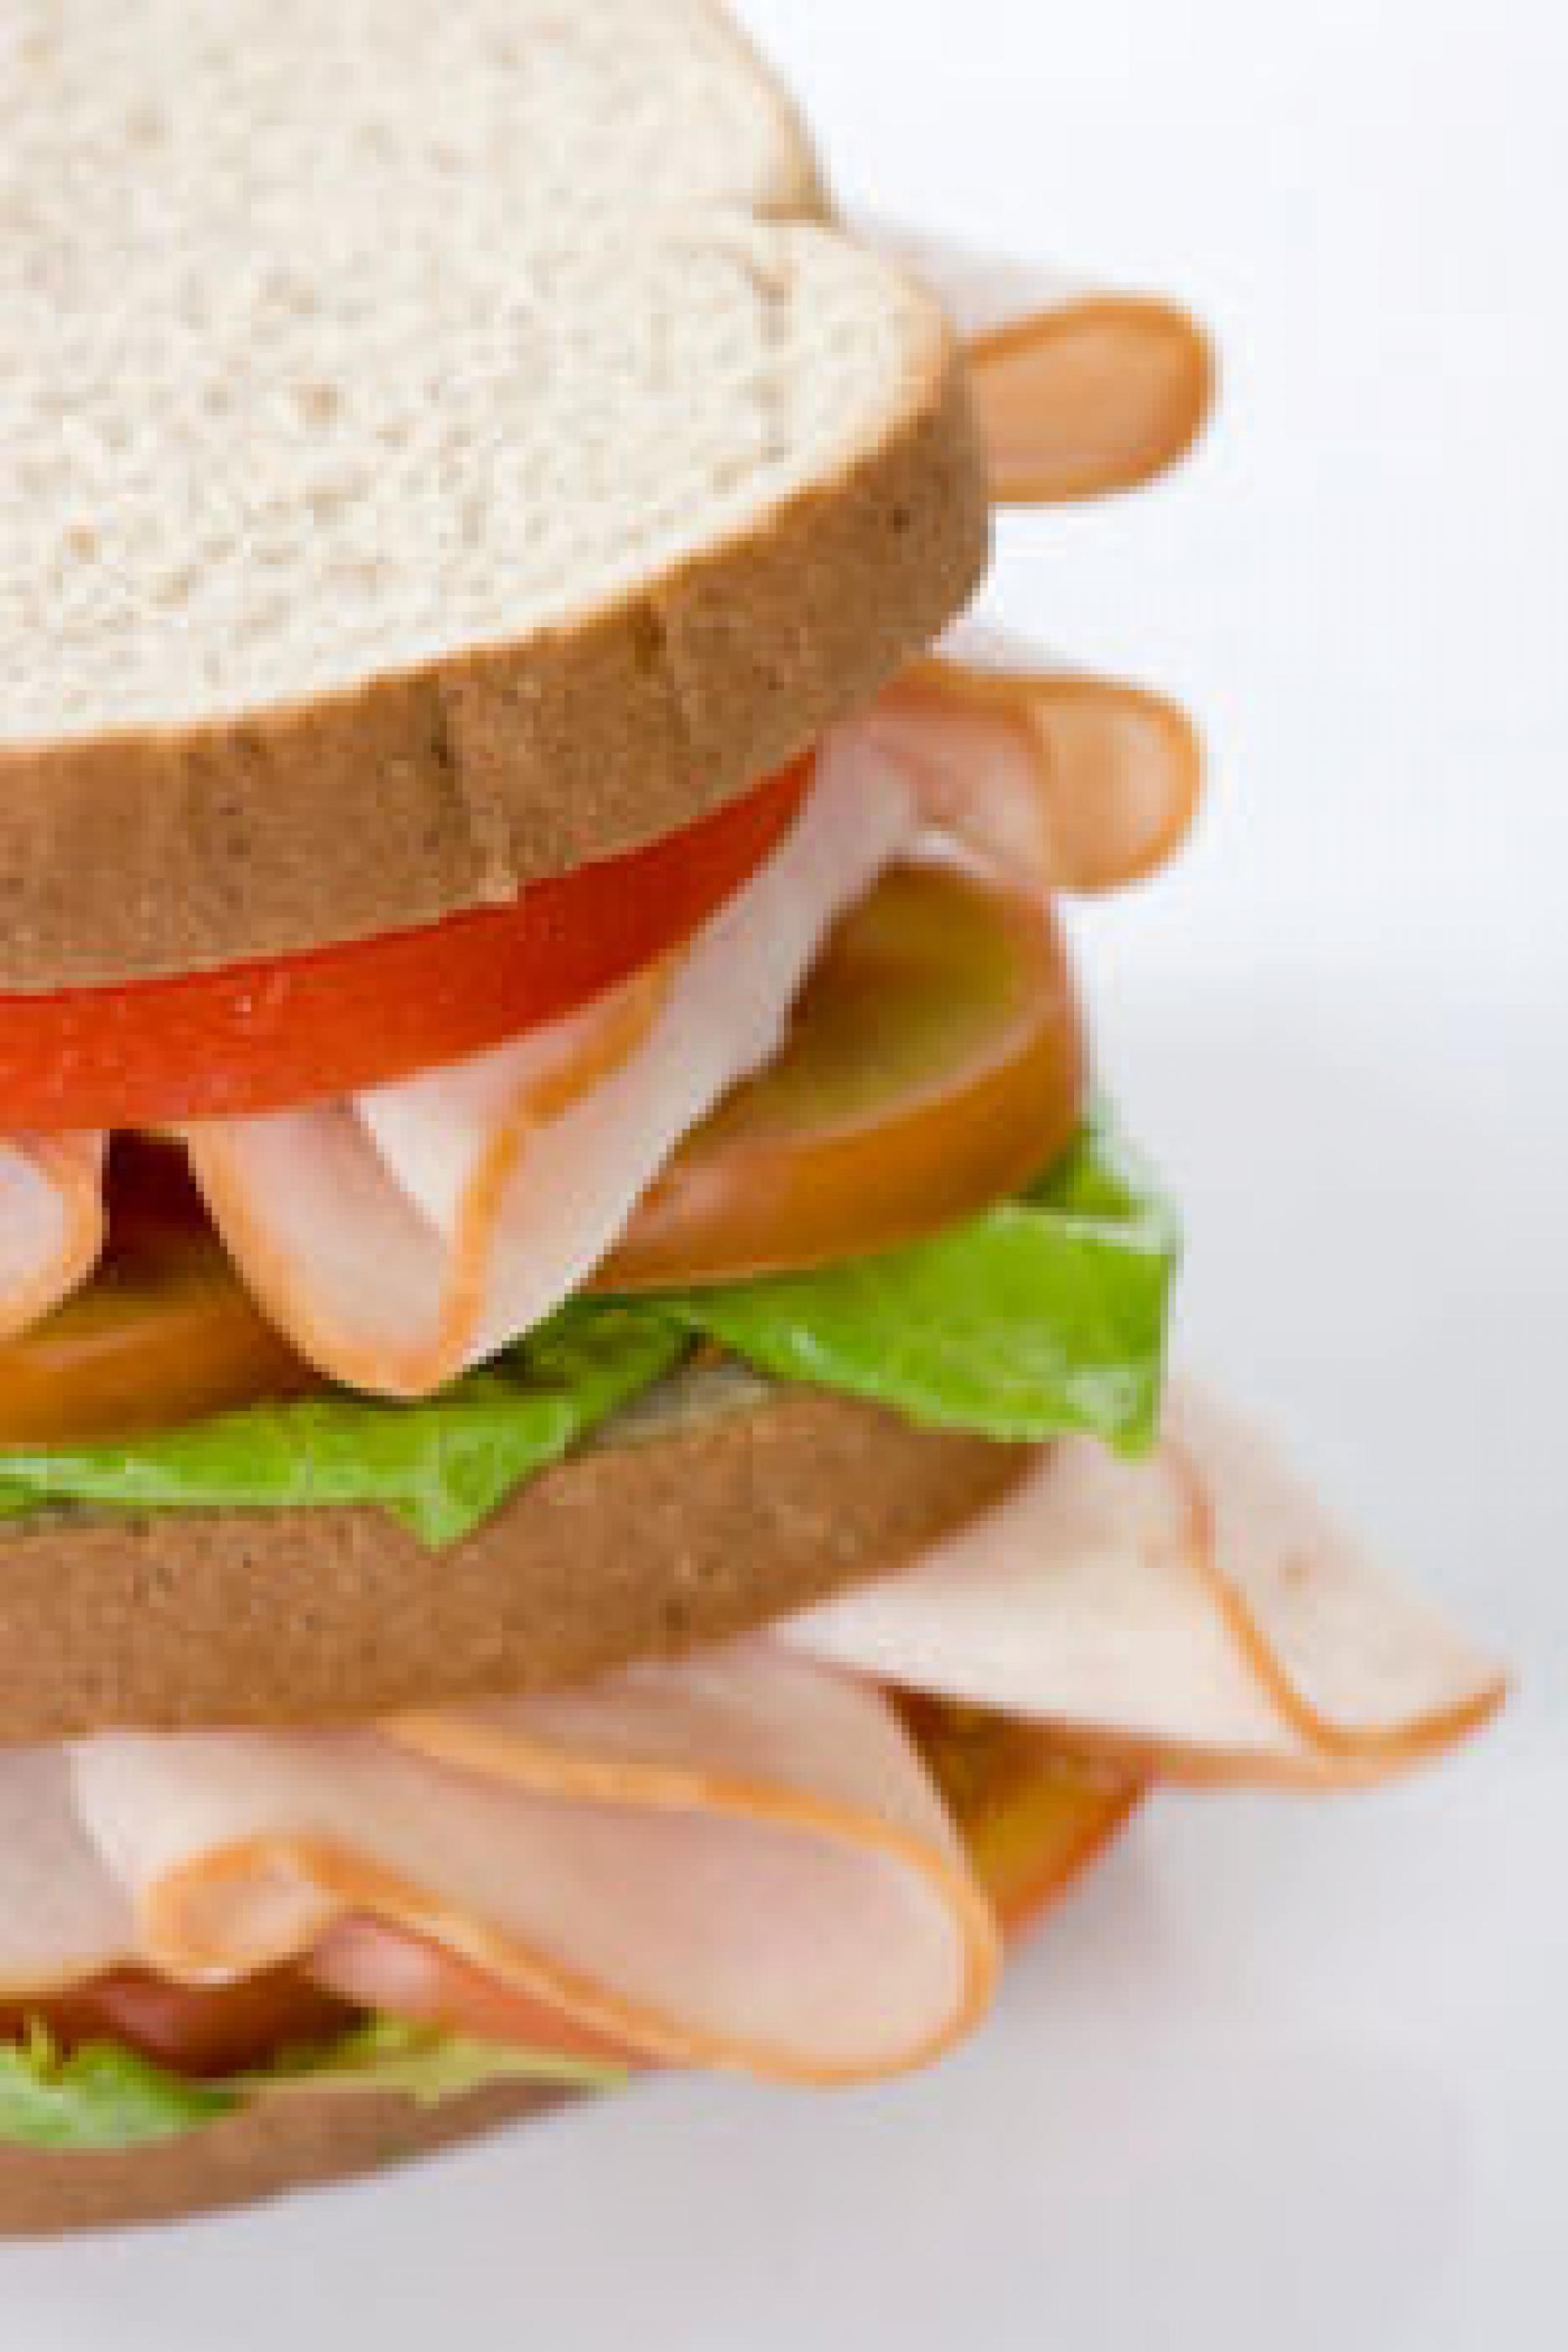 Restaurants gear up for The Ultimate Sandwich contest | Craft Guild of ...